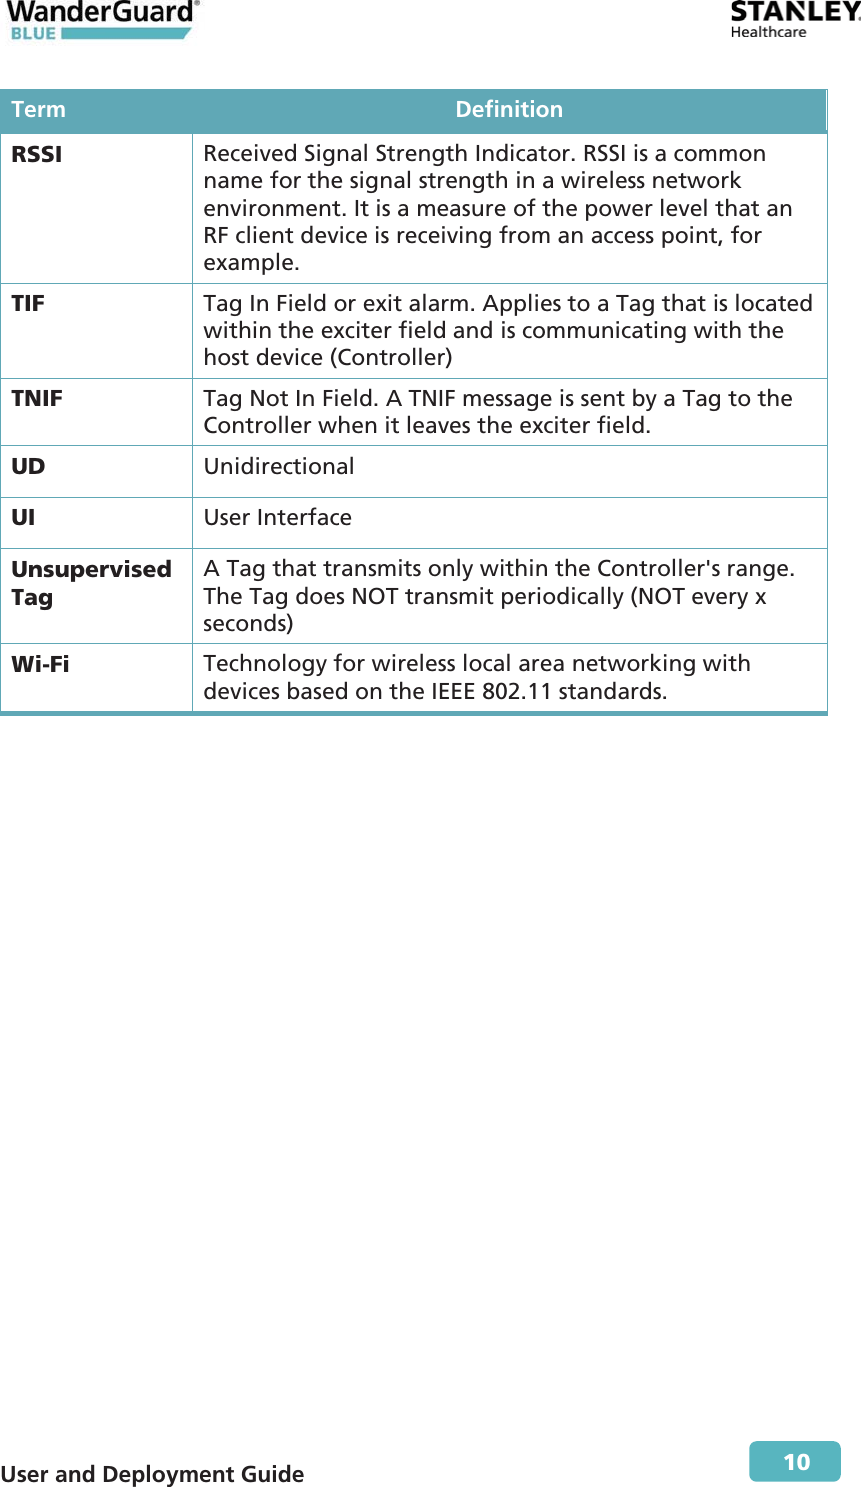  User and Deployment Guide        10 Term DefinitionRSSI  Received Signal Strength Indicator. RSSI is a common name for the signal strength in a wireless network environment. It is a measure of the power level that an RF client device is receiving from an access point, for example. TIF  Tag In Field or exit alarm. Applies to a Tag that is located within the exciter field and is communicating with the host device (Controller) TNIF  Tag Not In Field. A TNIF message is sent by a Tag to the Controller when it leaves the exciter field. UD  Unidirectional UI  User Interface Unsupervised Tag A Tag that transmits only within the Controller&apos;s range. The Tag does NOT transmit periodically (NOT every x seconds) Wi-Fi  Technology for wireless local area networking with devices based on the IEEE 802.11 standards.  